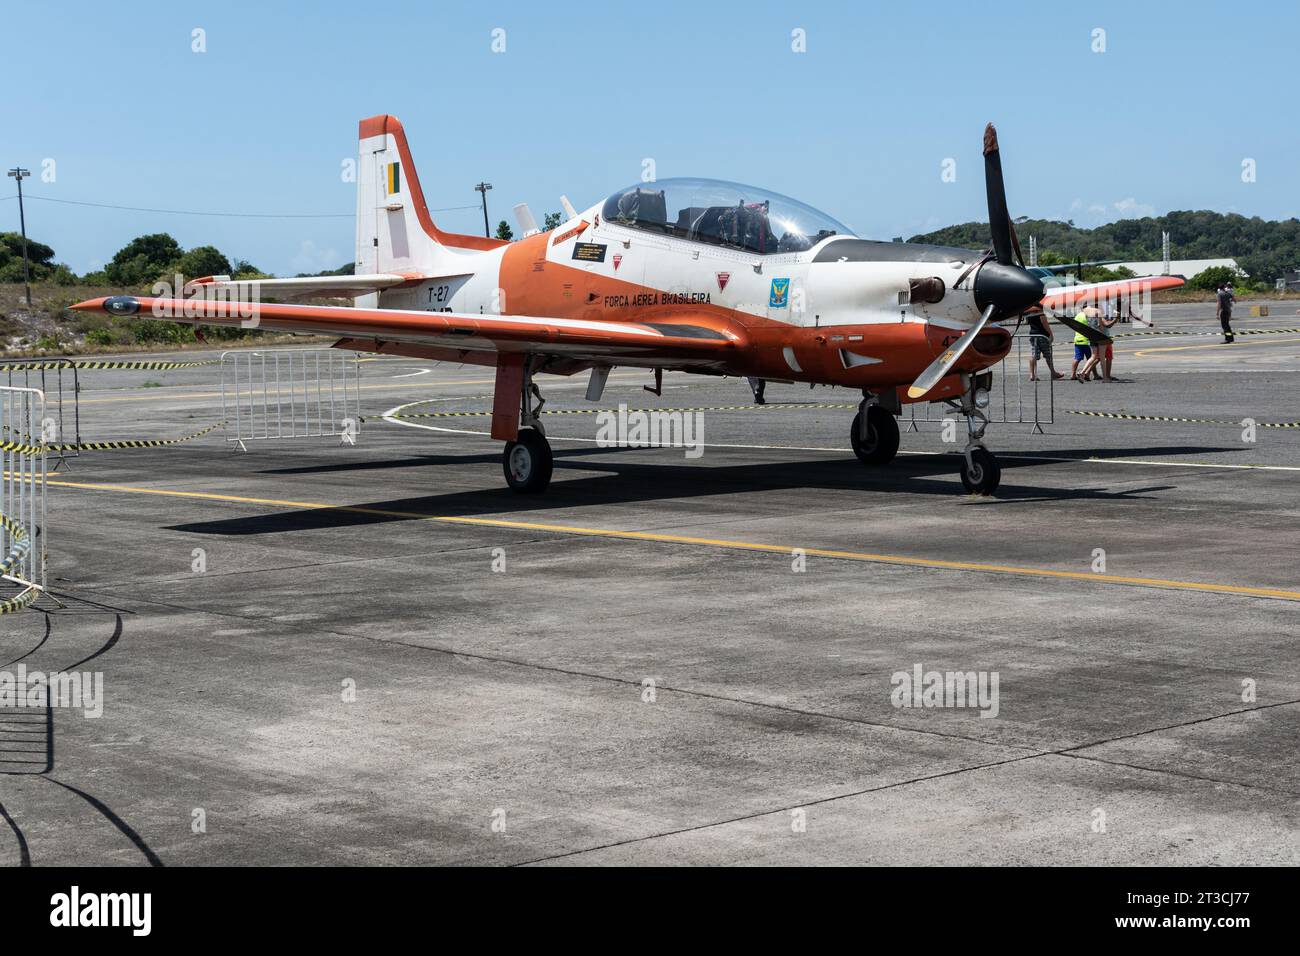 Salvador, Bahia, Brazil - November 11, 2014: A T-27 aircraft from the Brazilian air force is seen at the Open Gates exhibition of aeronautics in the c Stock Photo